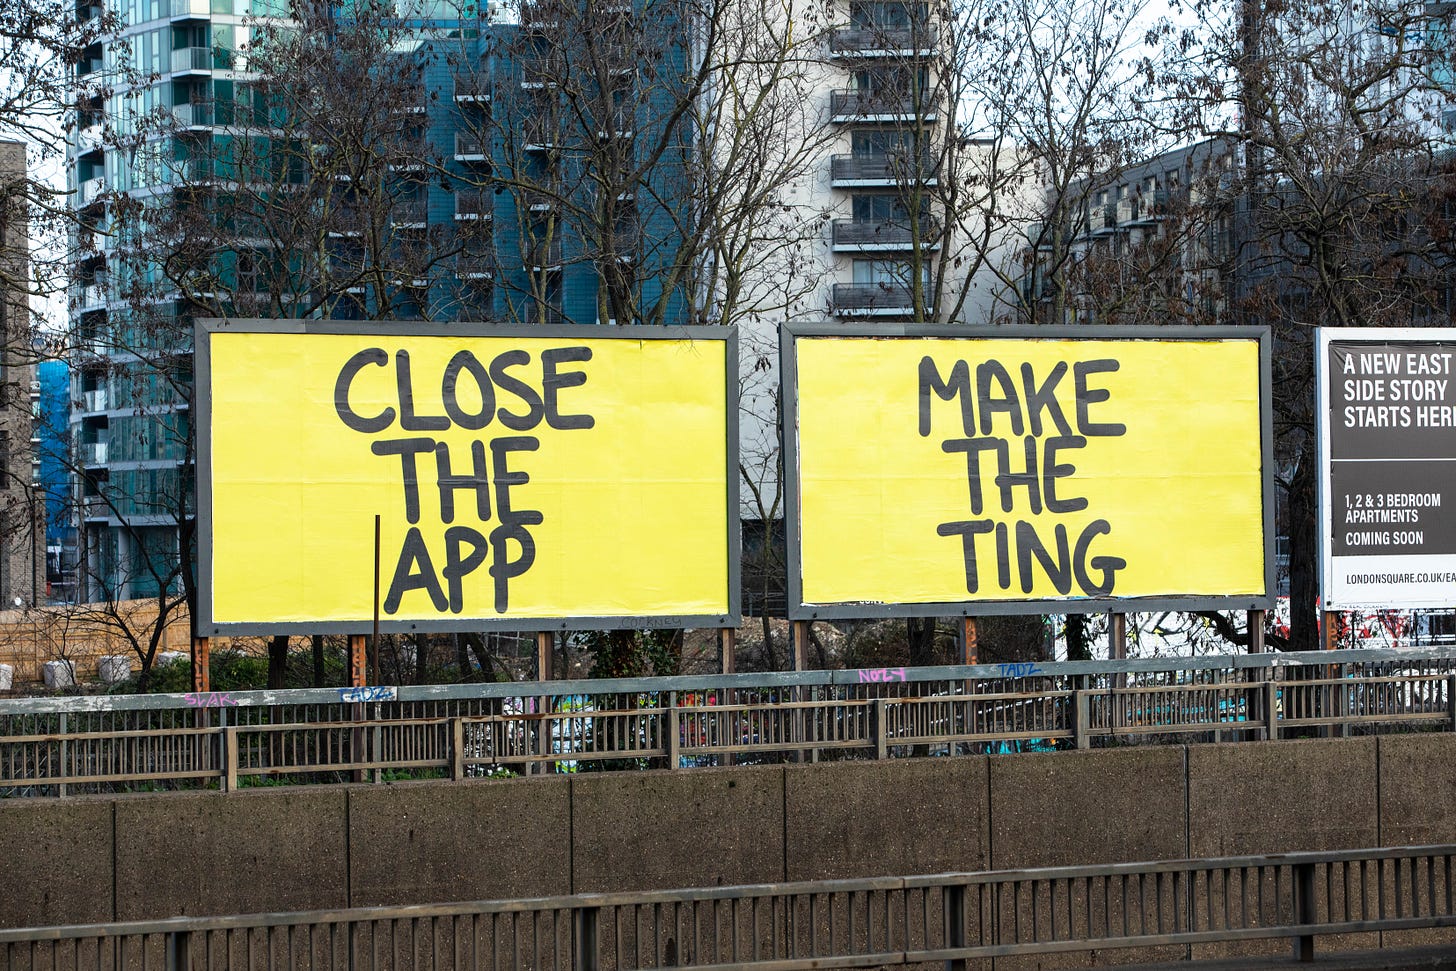 Image shows two yellow billboards reading "CLOSE THE APP" and "MAKE THE TING".